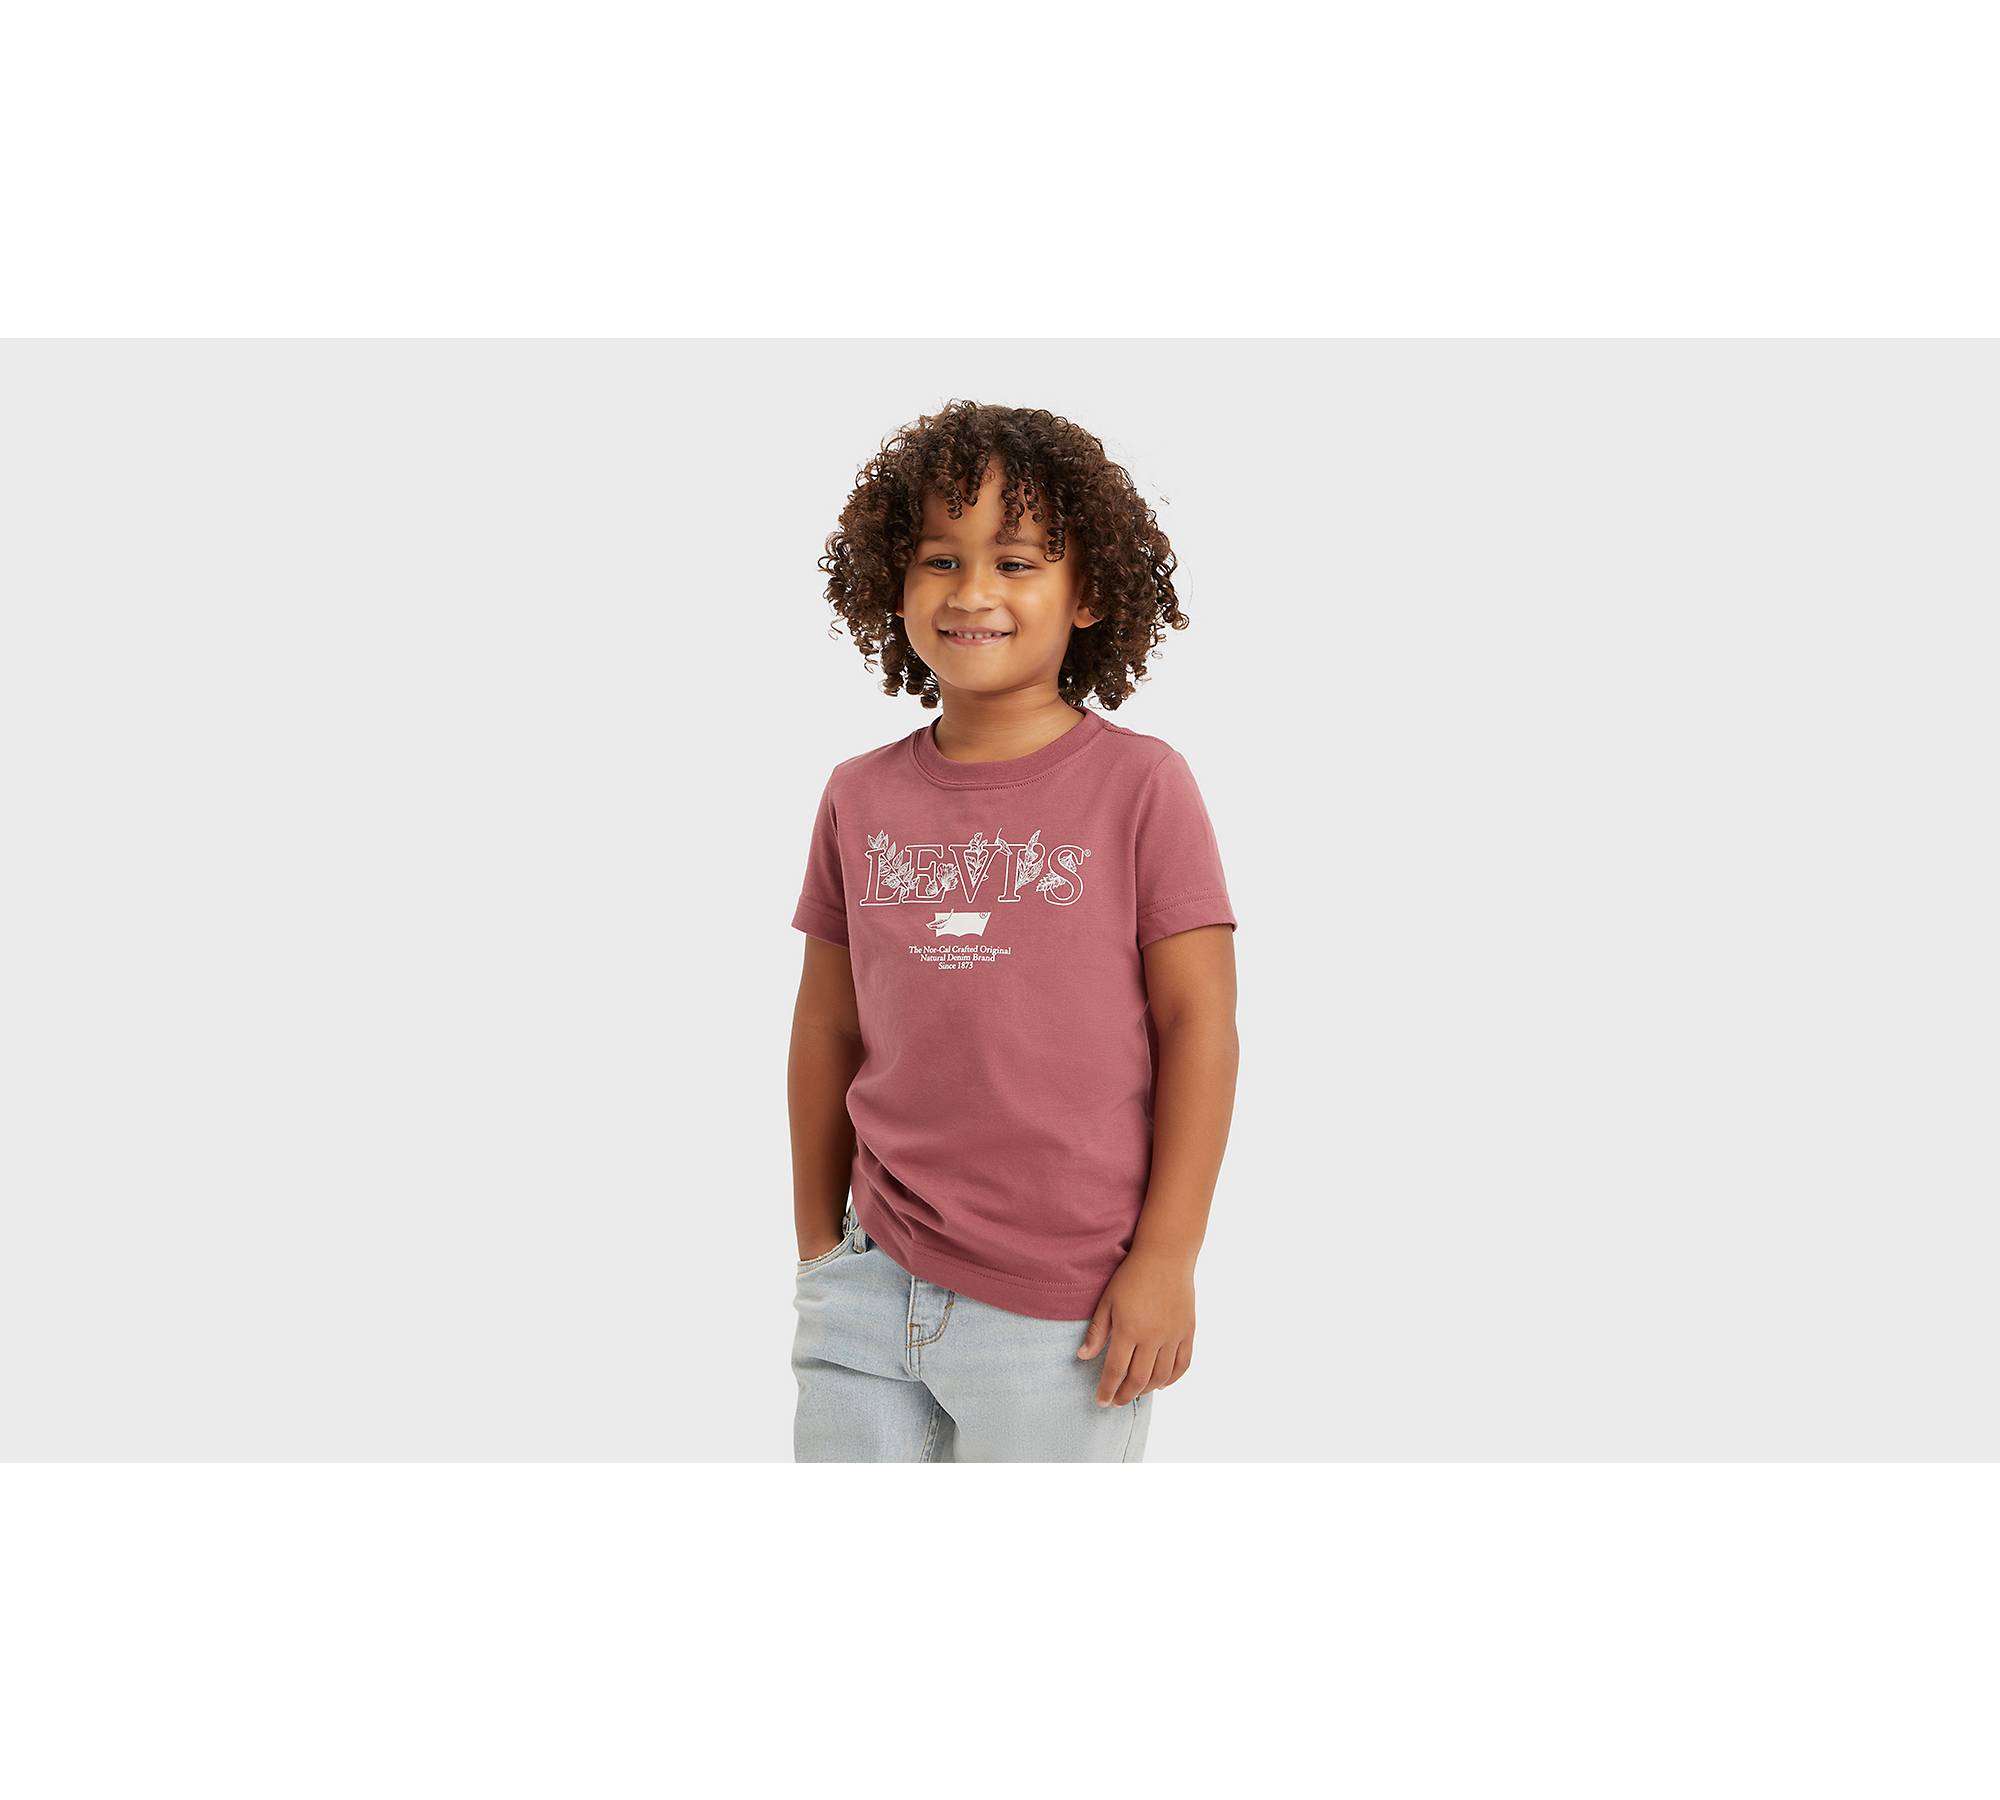 Kids All Natural Levis Tee 1